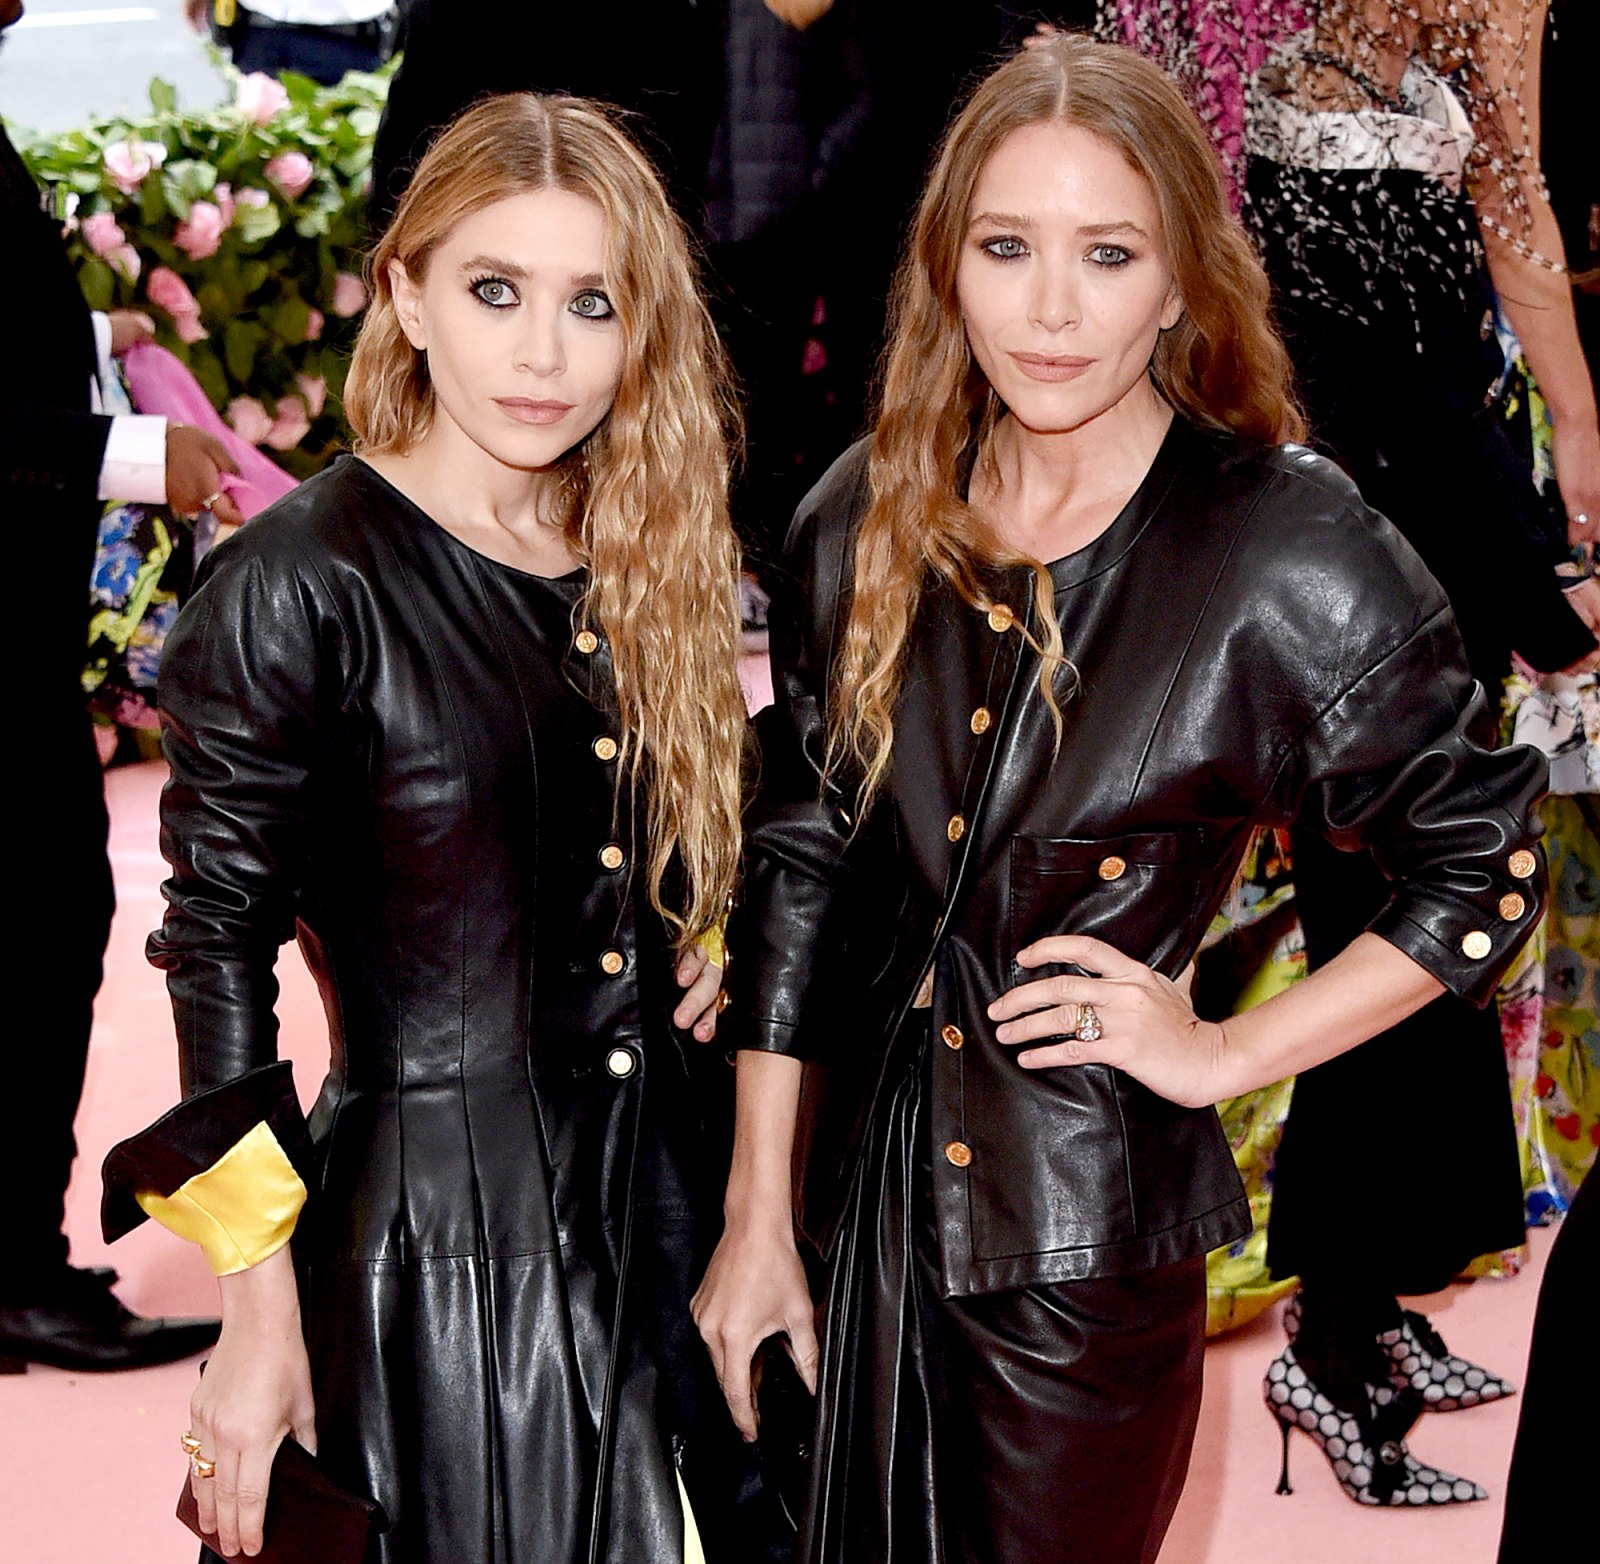 Met Gala 2019: Mary Kate and Ashley Olsen Matching Dresses | Us Weekly